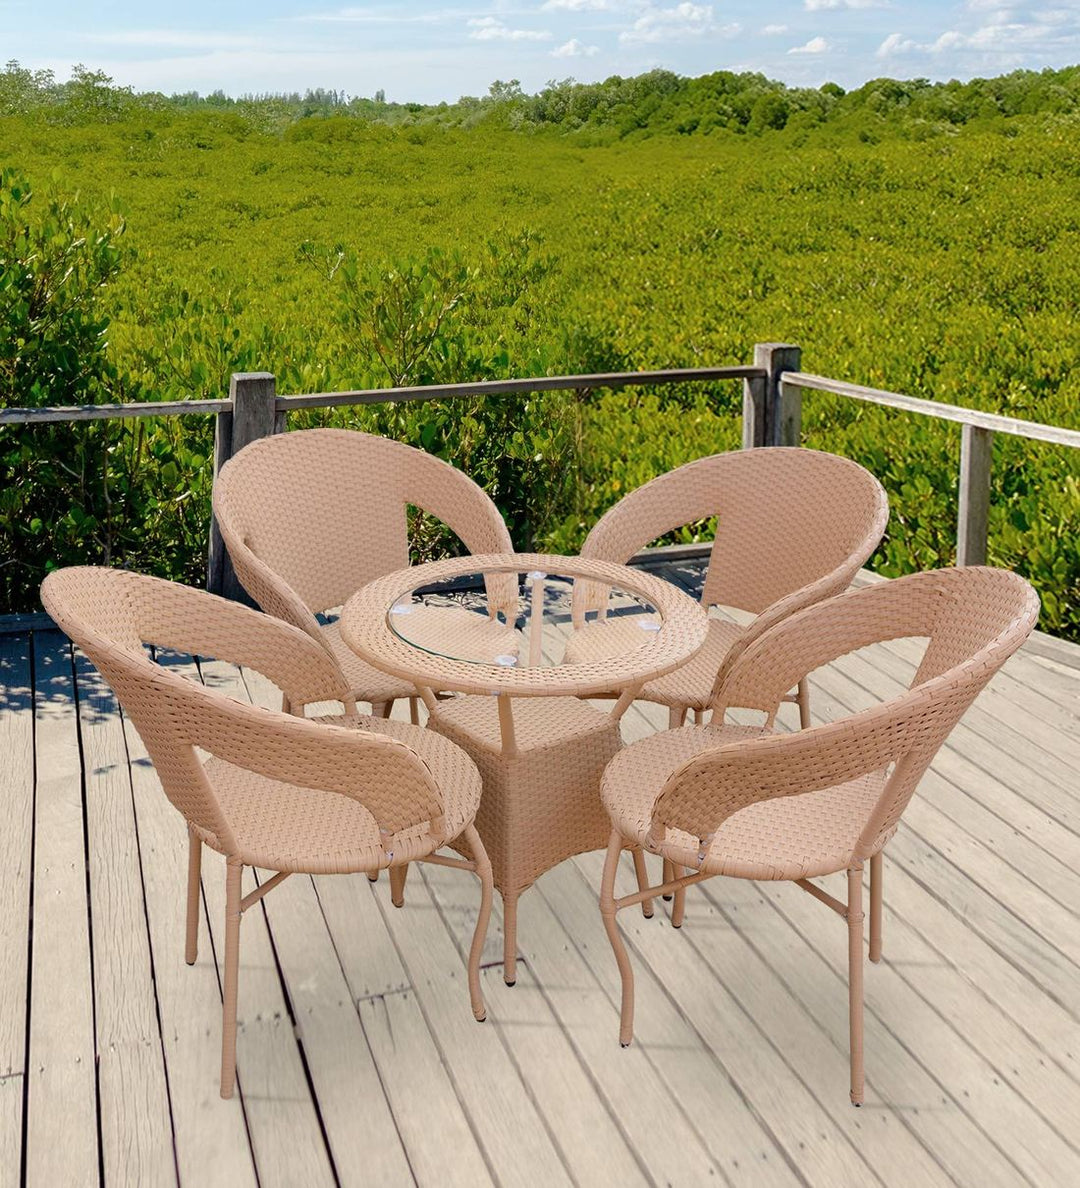 Dreamline Outdoor Furniture Garden Patio Seating Set 1+4 4 Chairs and Table Set Balcony Furniture Coffee Table Set